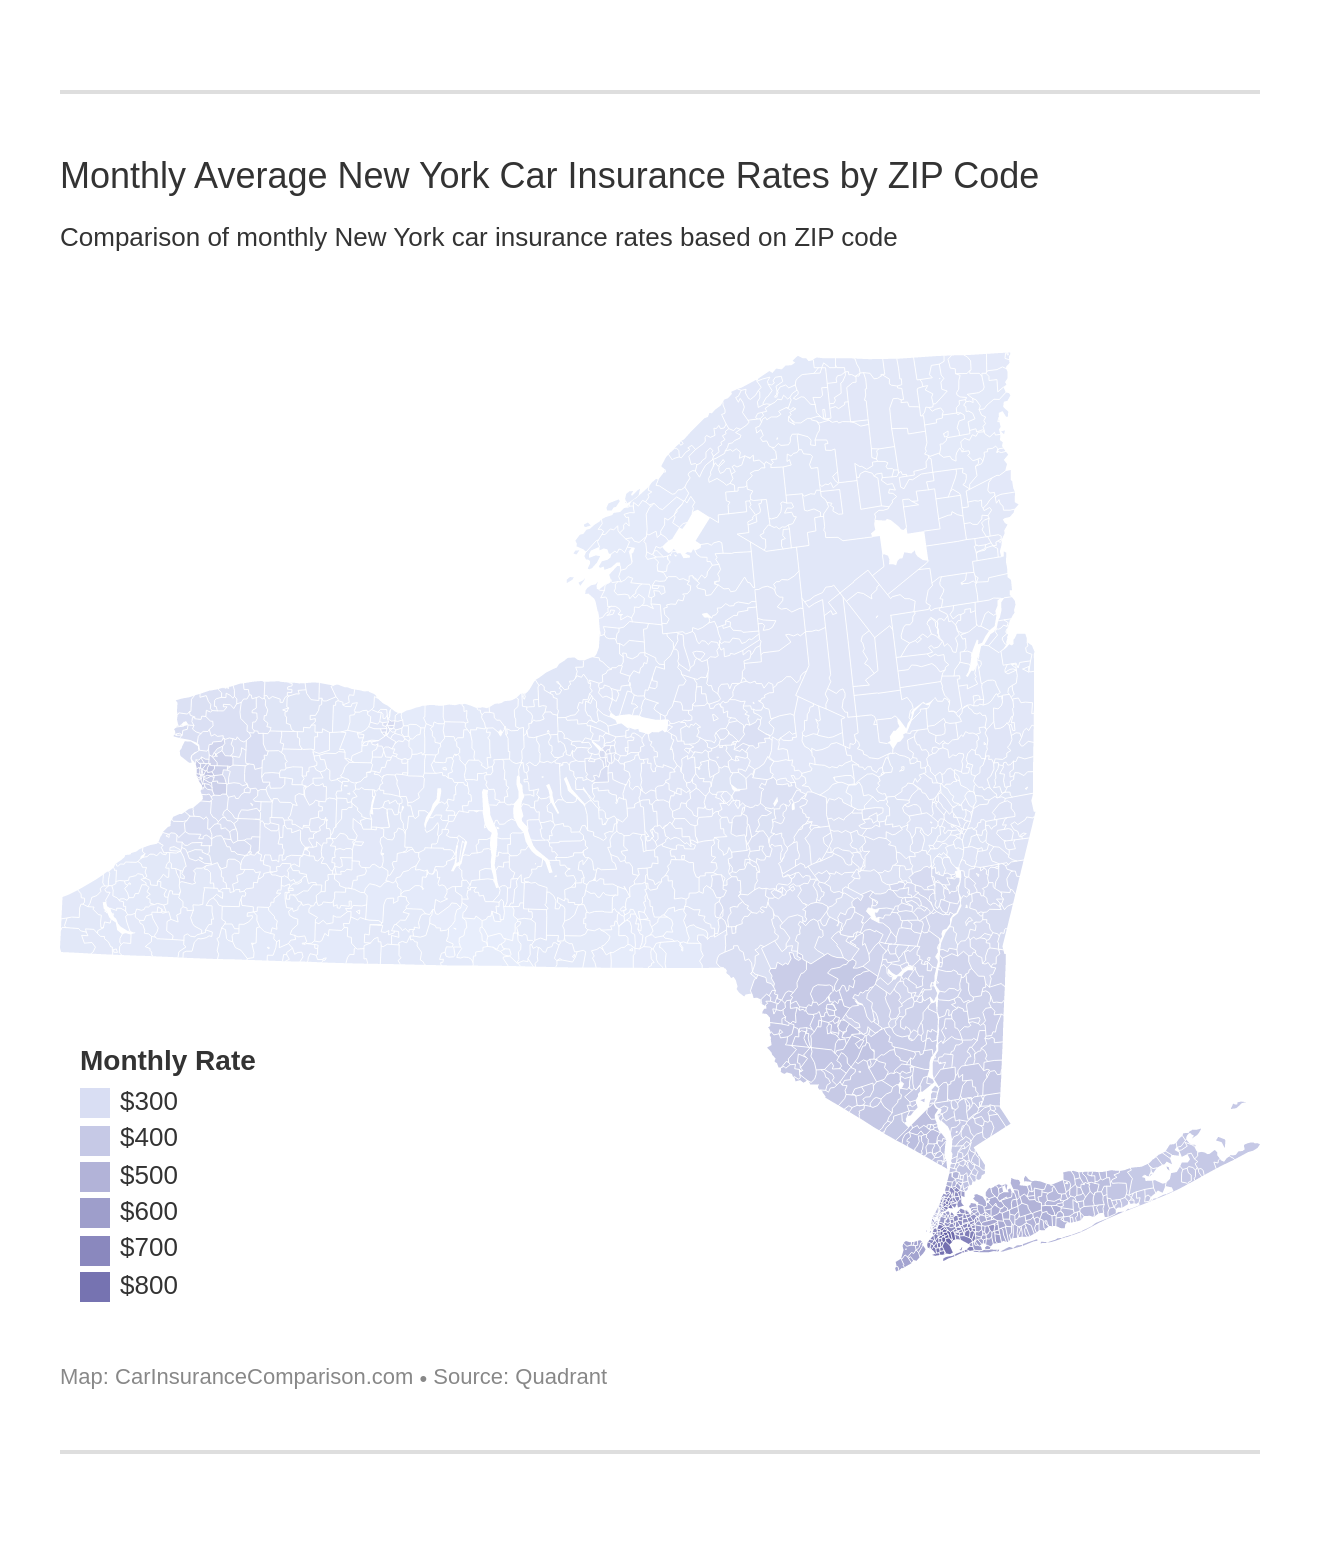 Monthly Average New York Car Insurance Rates by ZIP Code